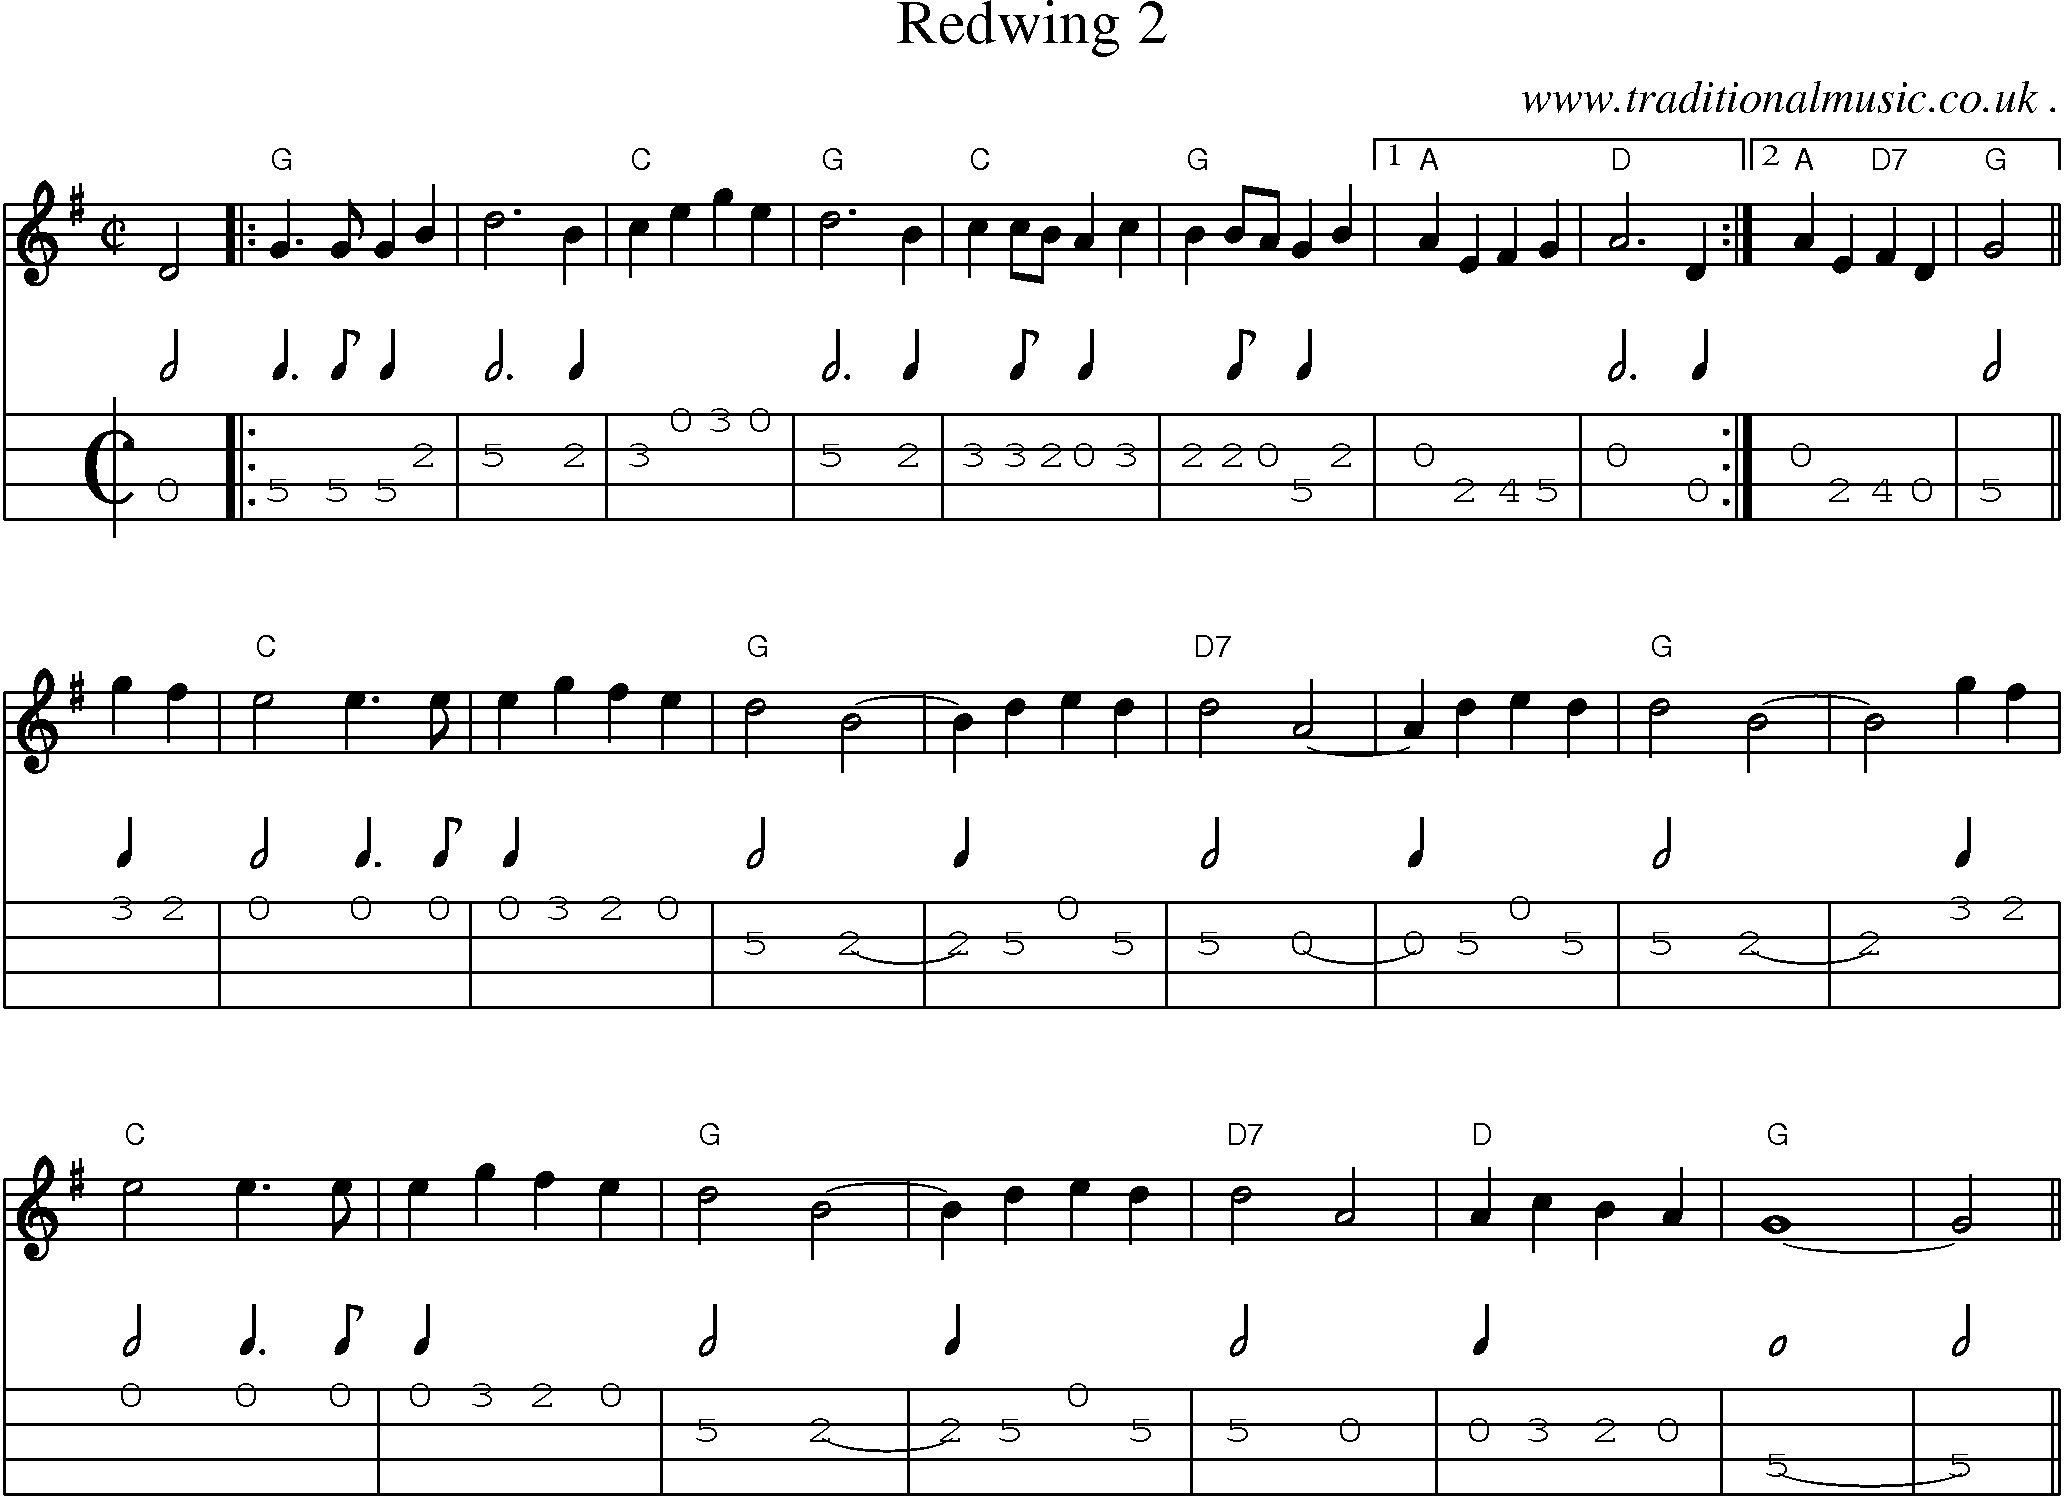 Music Score and Guitar Tabs for Redwing 2